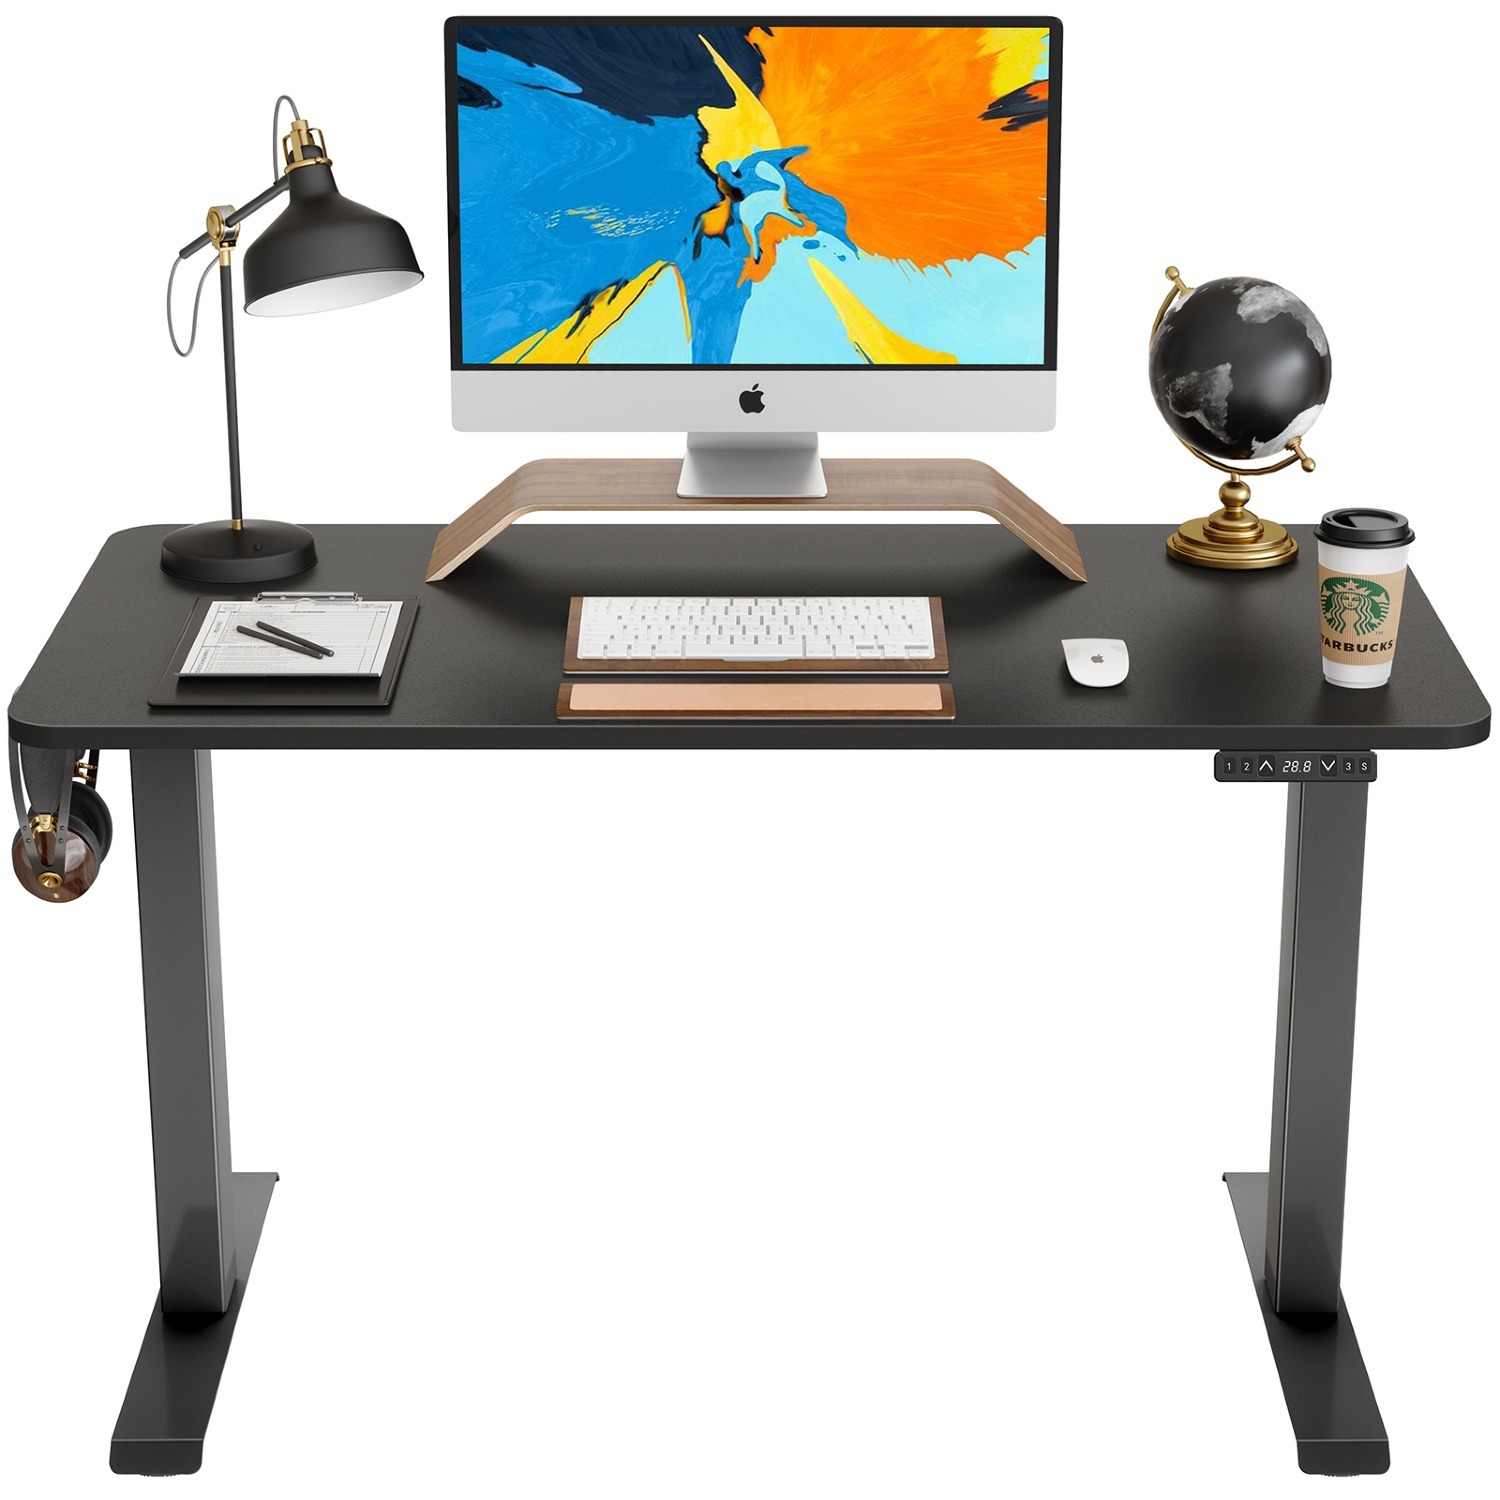 Famisky Dual Motor Adjustable Height Electric Standing Desk 40" x 24" $159.99 and More + Free Shipping